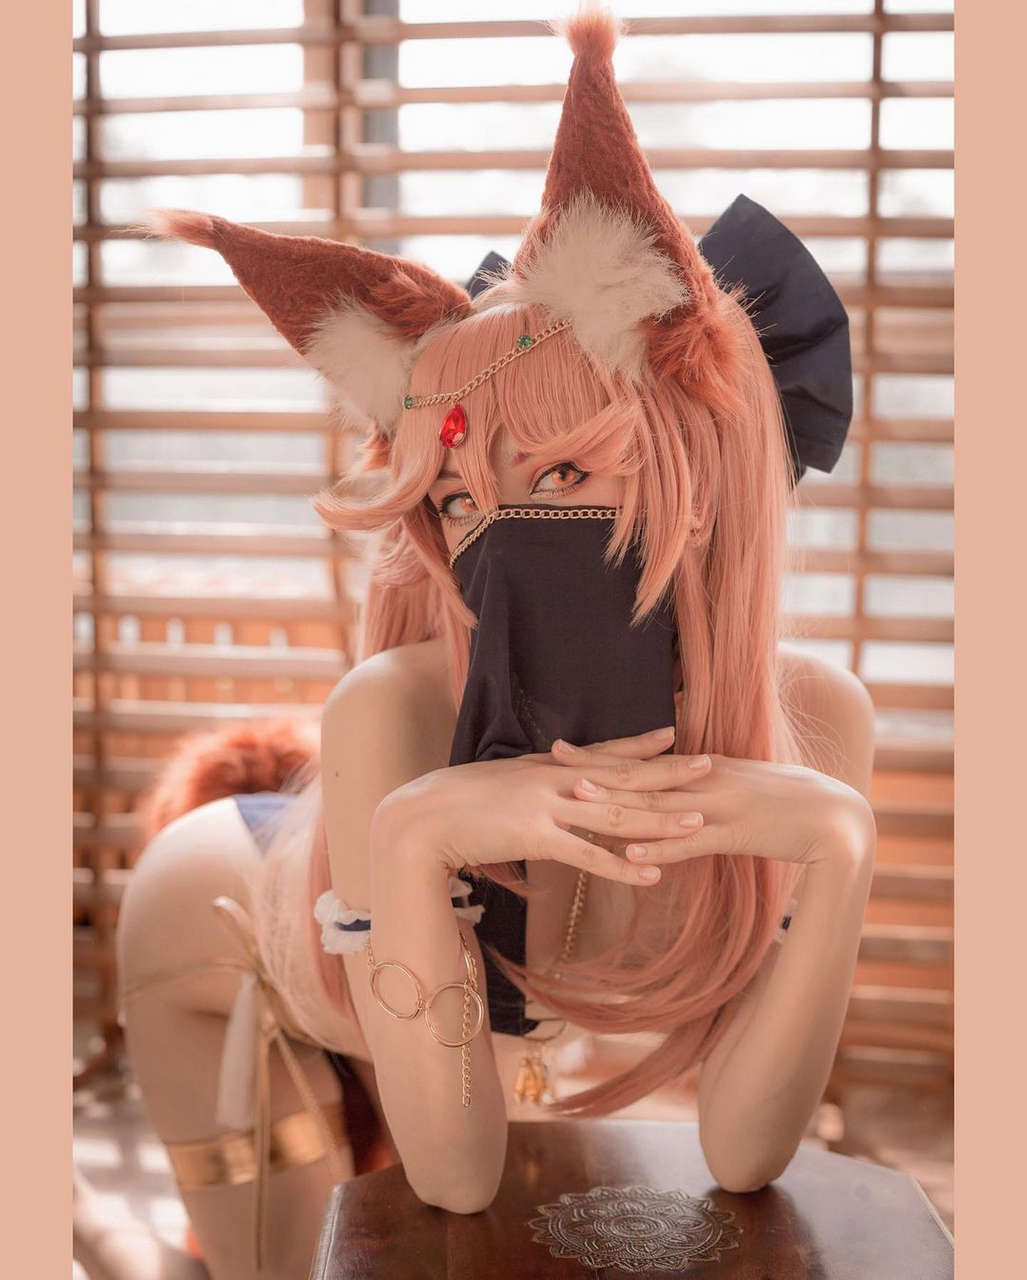 Tamamo No Mae From Fate By Tenletter